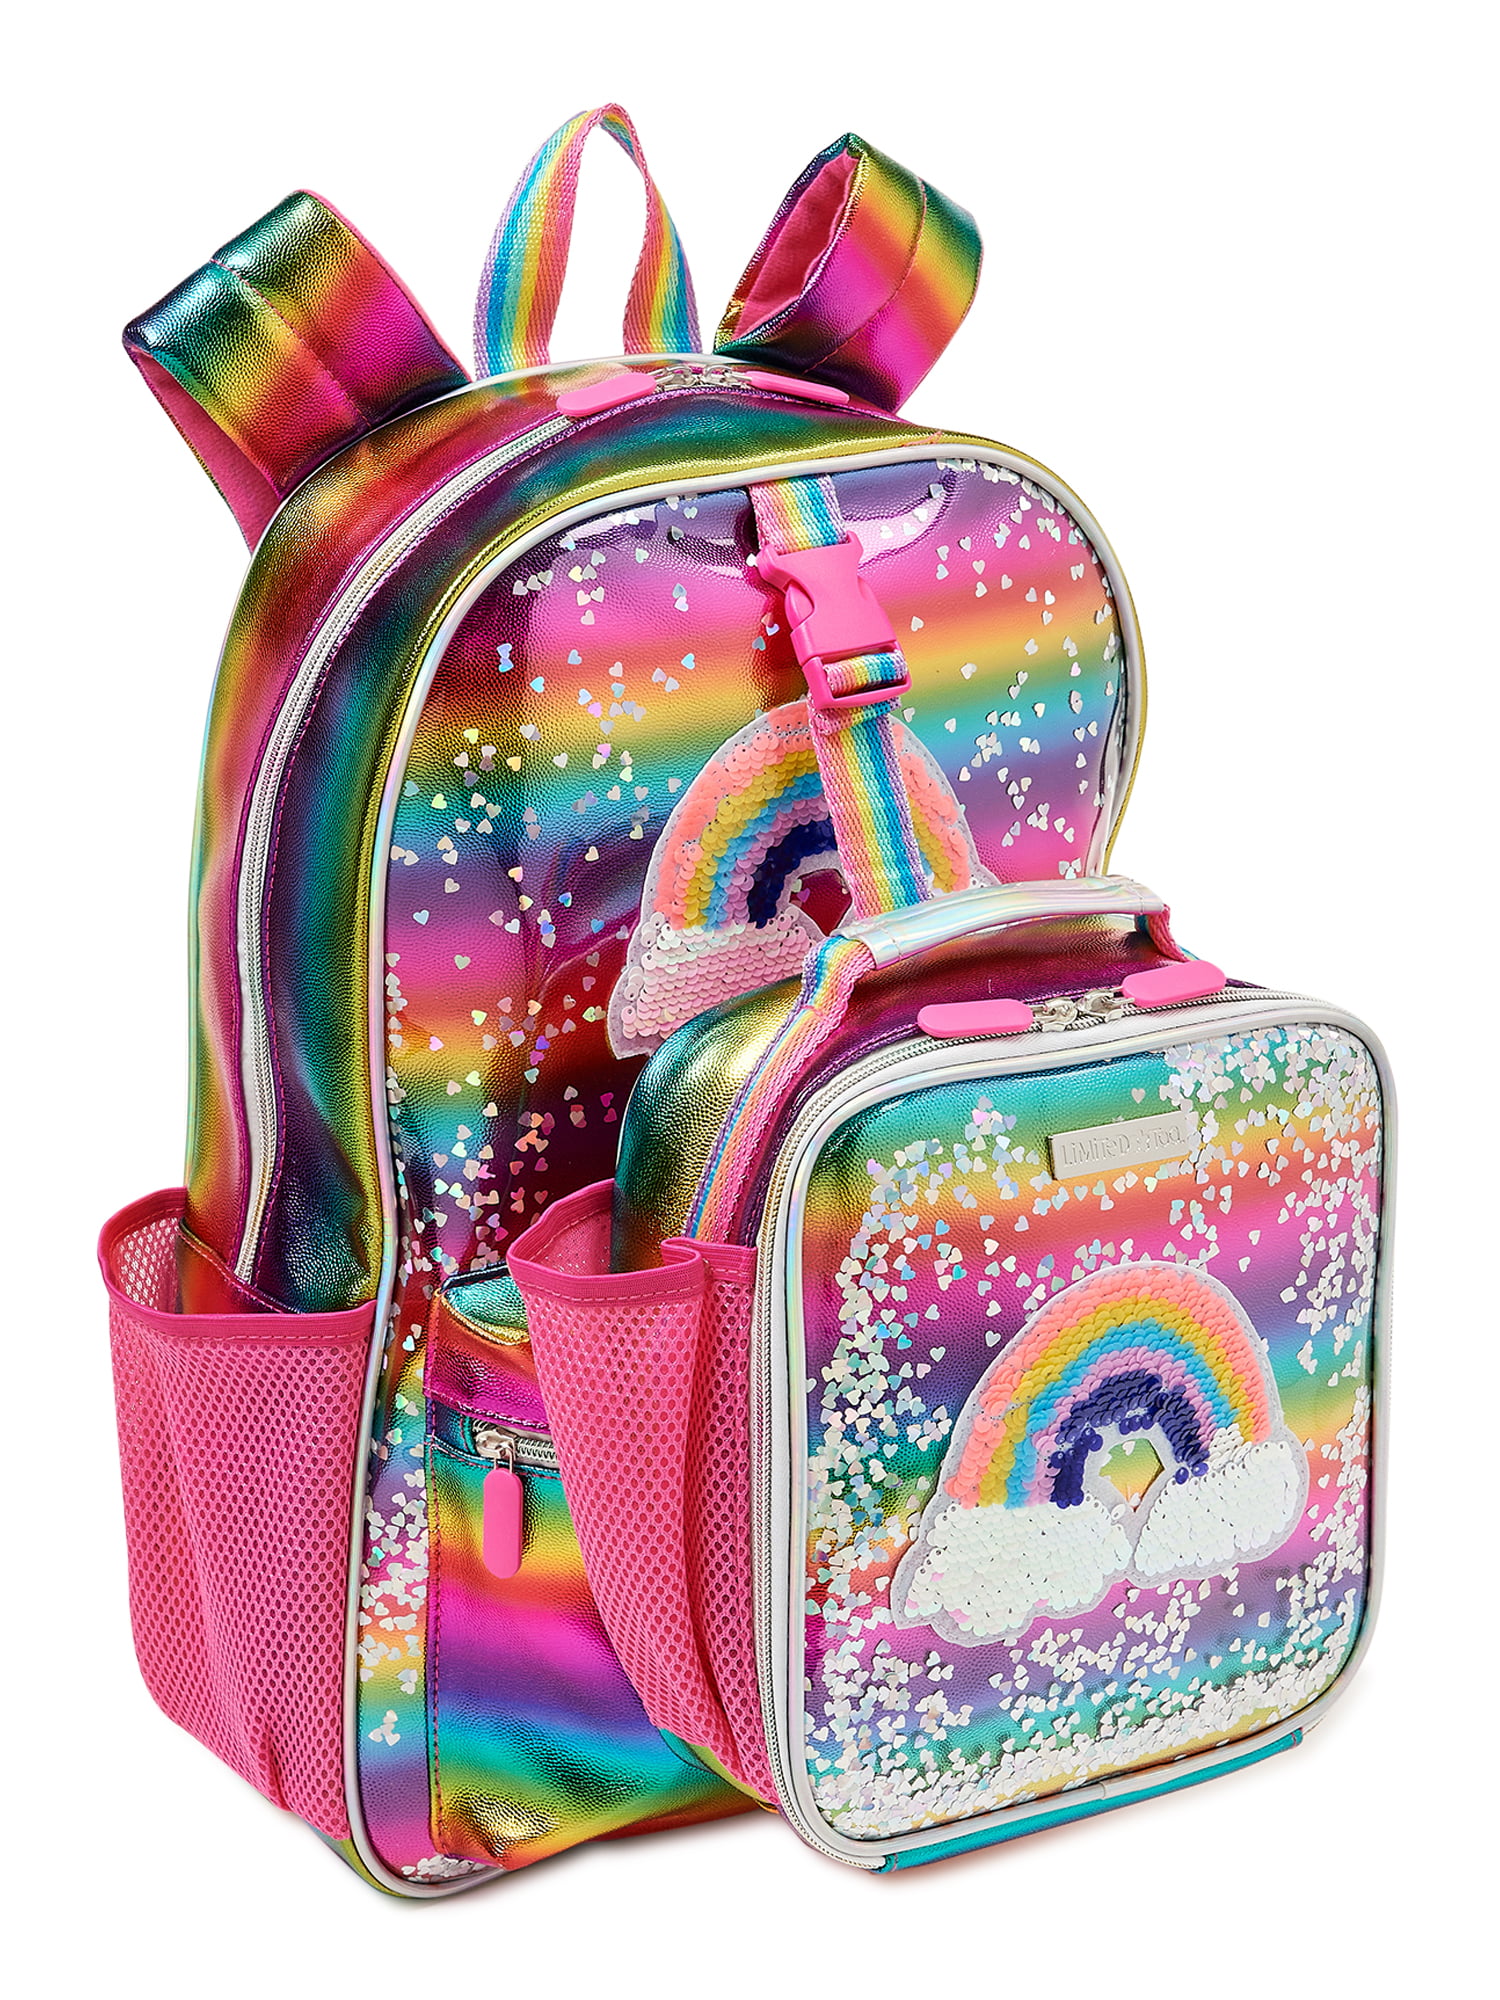 JUSTICE SHINE BRIGHT LIKE A STAR BACKPACK/LUNCH/WATER BOTTLE/PENCILCASE SET WOW! 